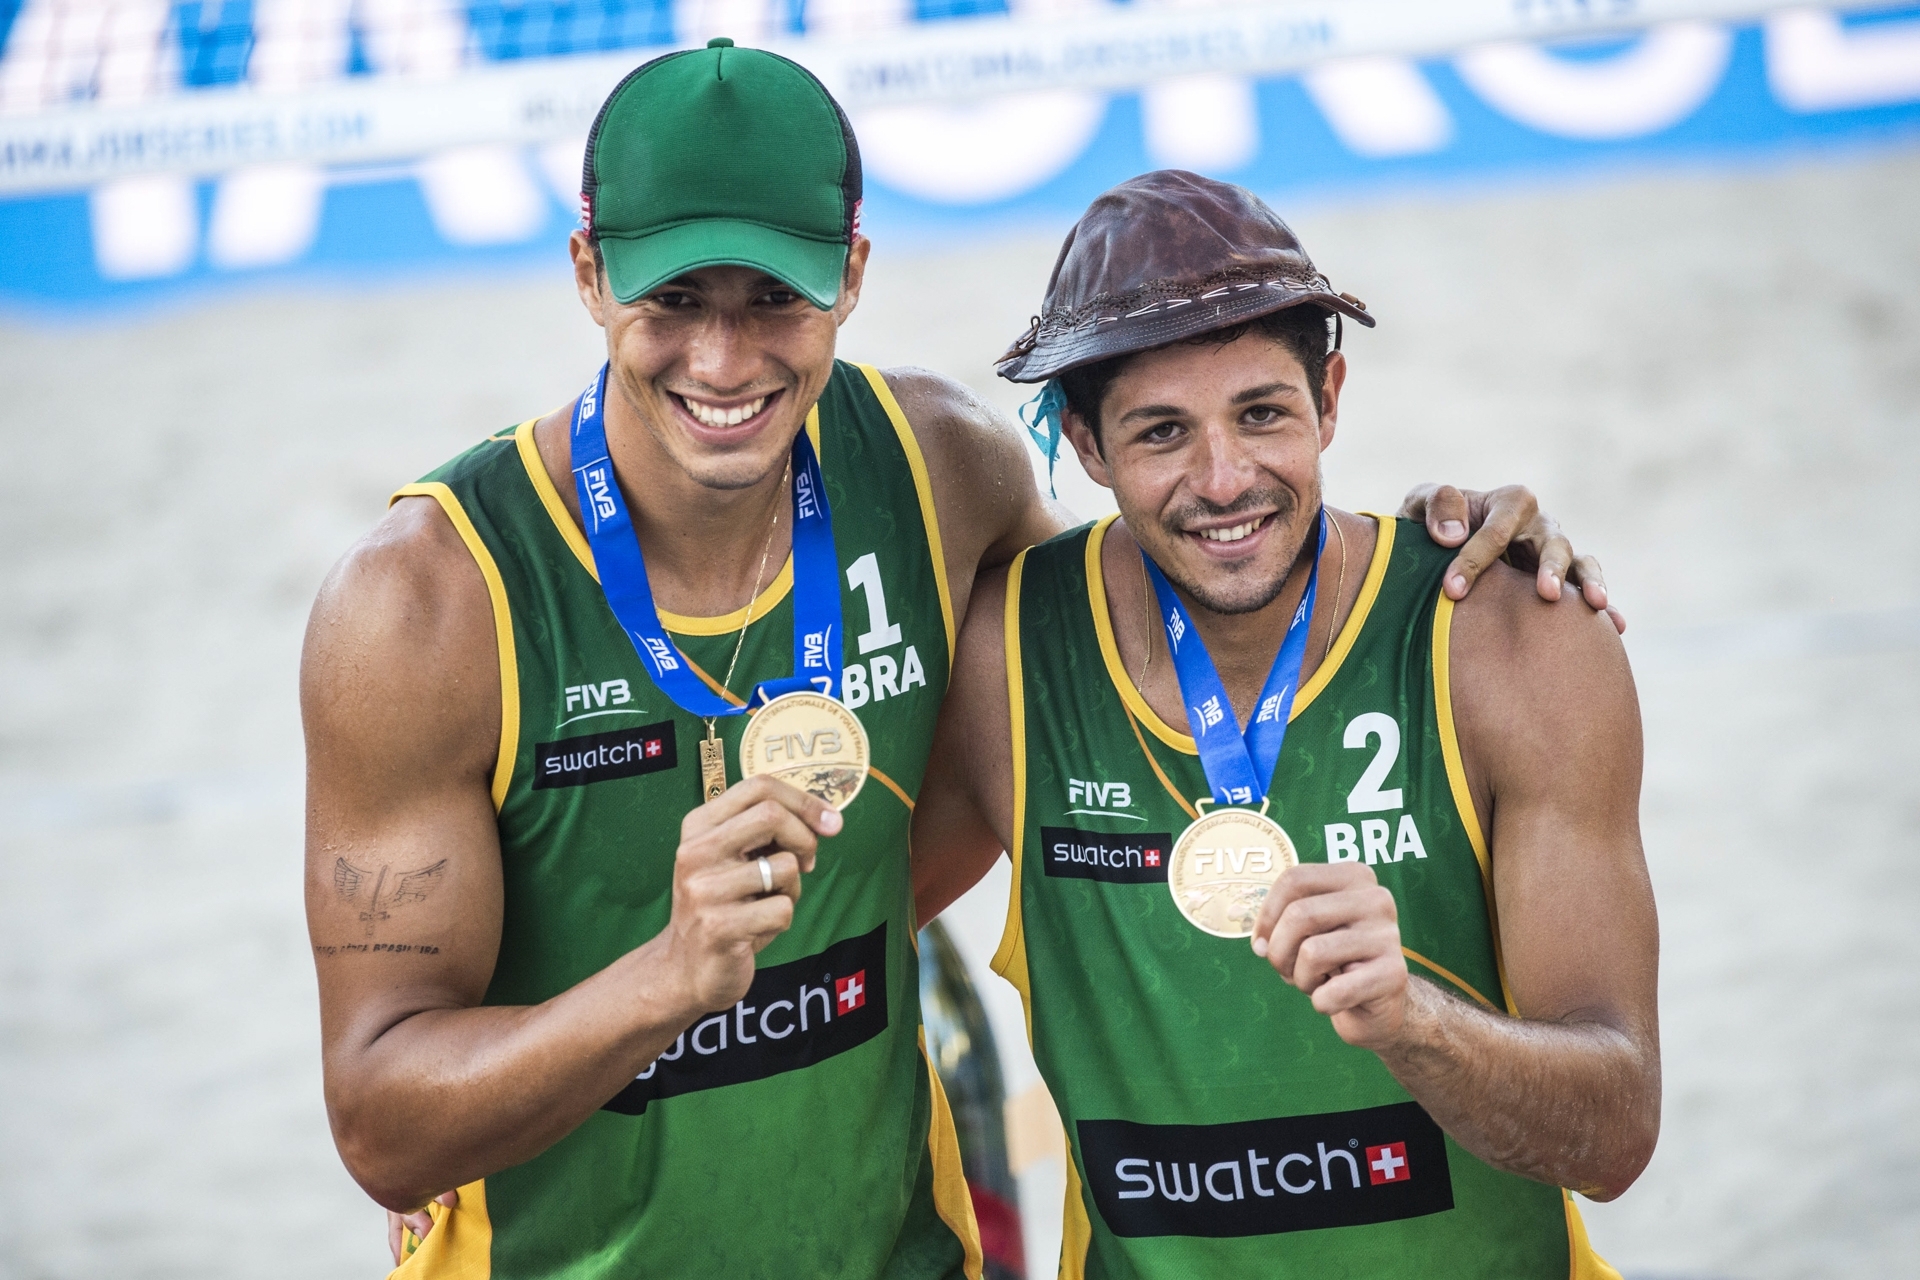 Alvaro Filho and Saymon Barbosa will start from qualification in Fort Lauderdale for the second straight year